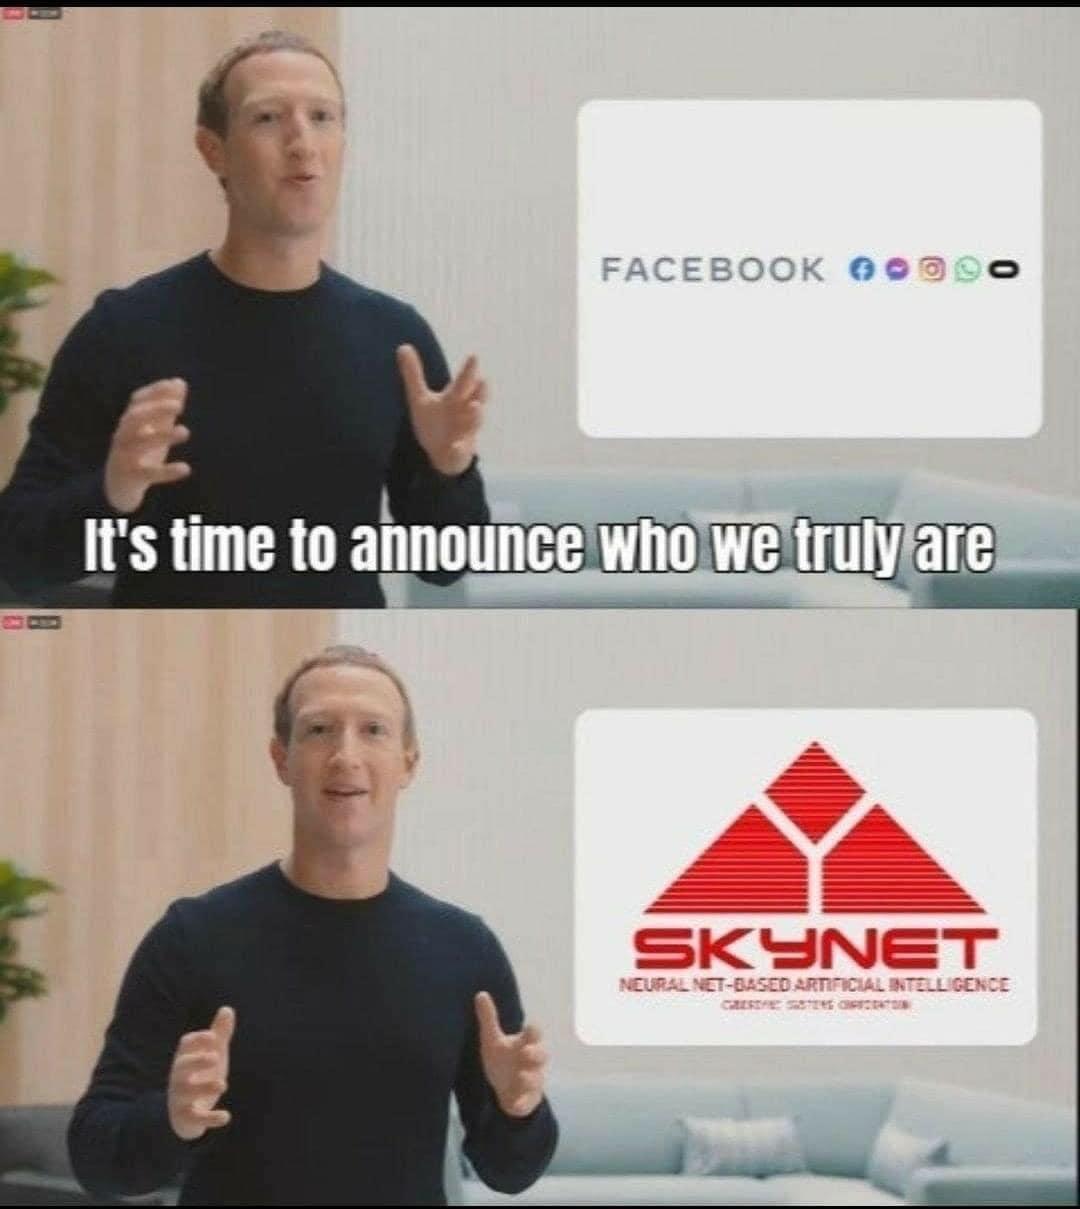 funny memes - dank memes - facebook metaverse persona 5 - Facebook 90 It's time to announce who we truly are Skynet Neural NetBased Artificial Intelligence will